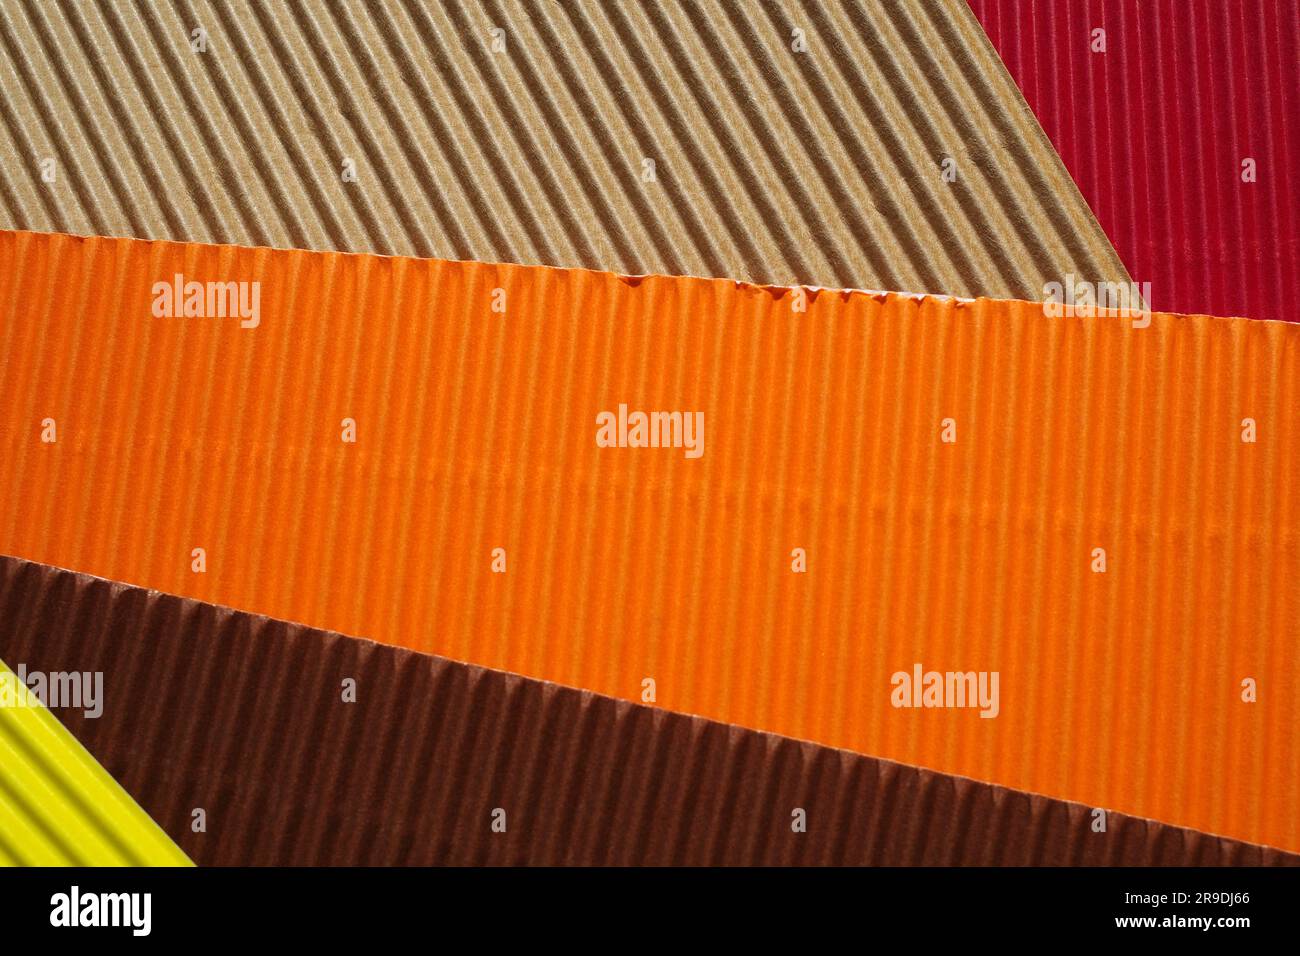 Diagonally ribbed cardboard with the colors beige, red, orange, brown and yellow. Meant as background Stock Photo